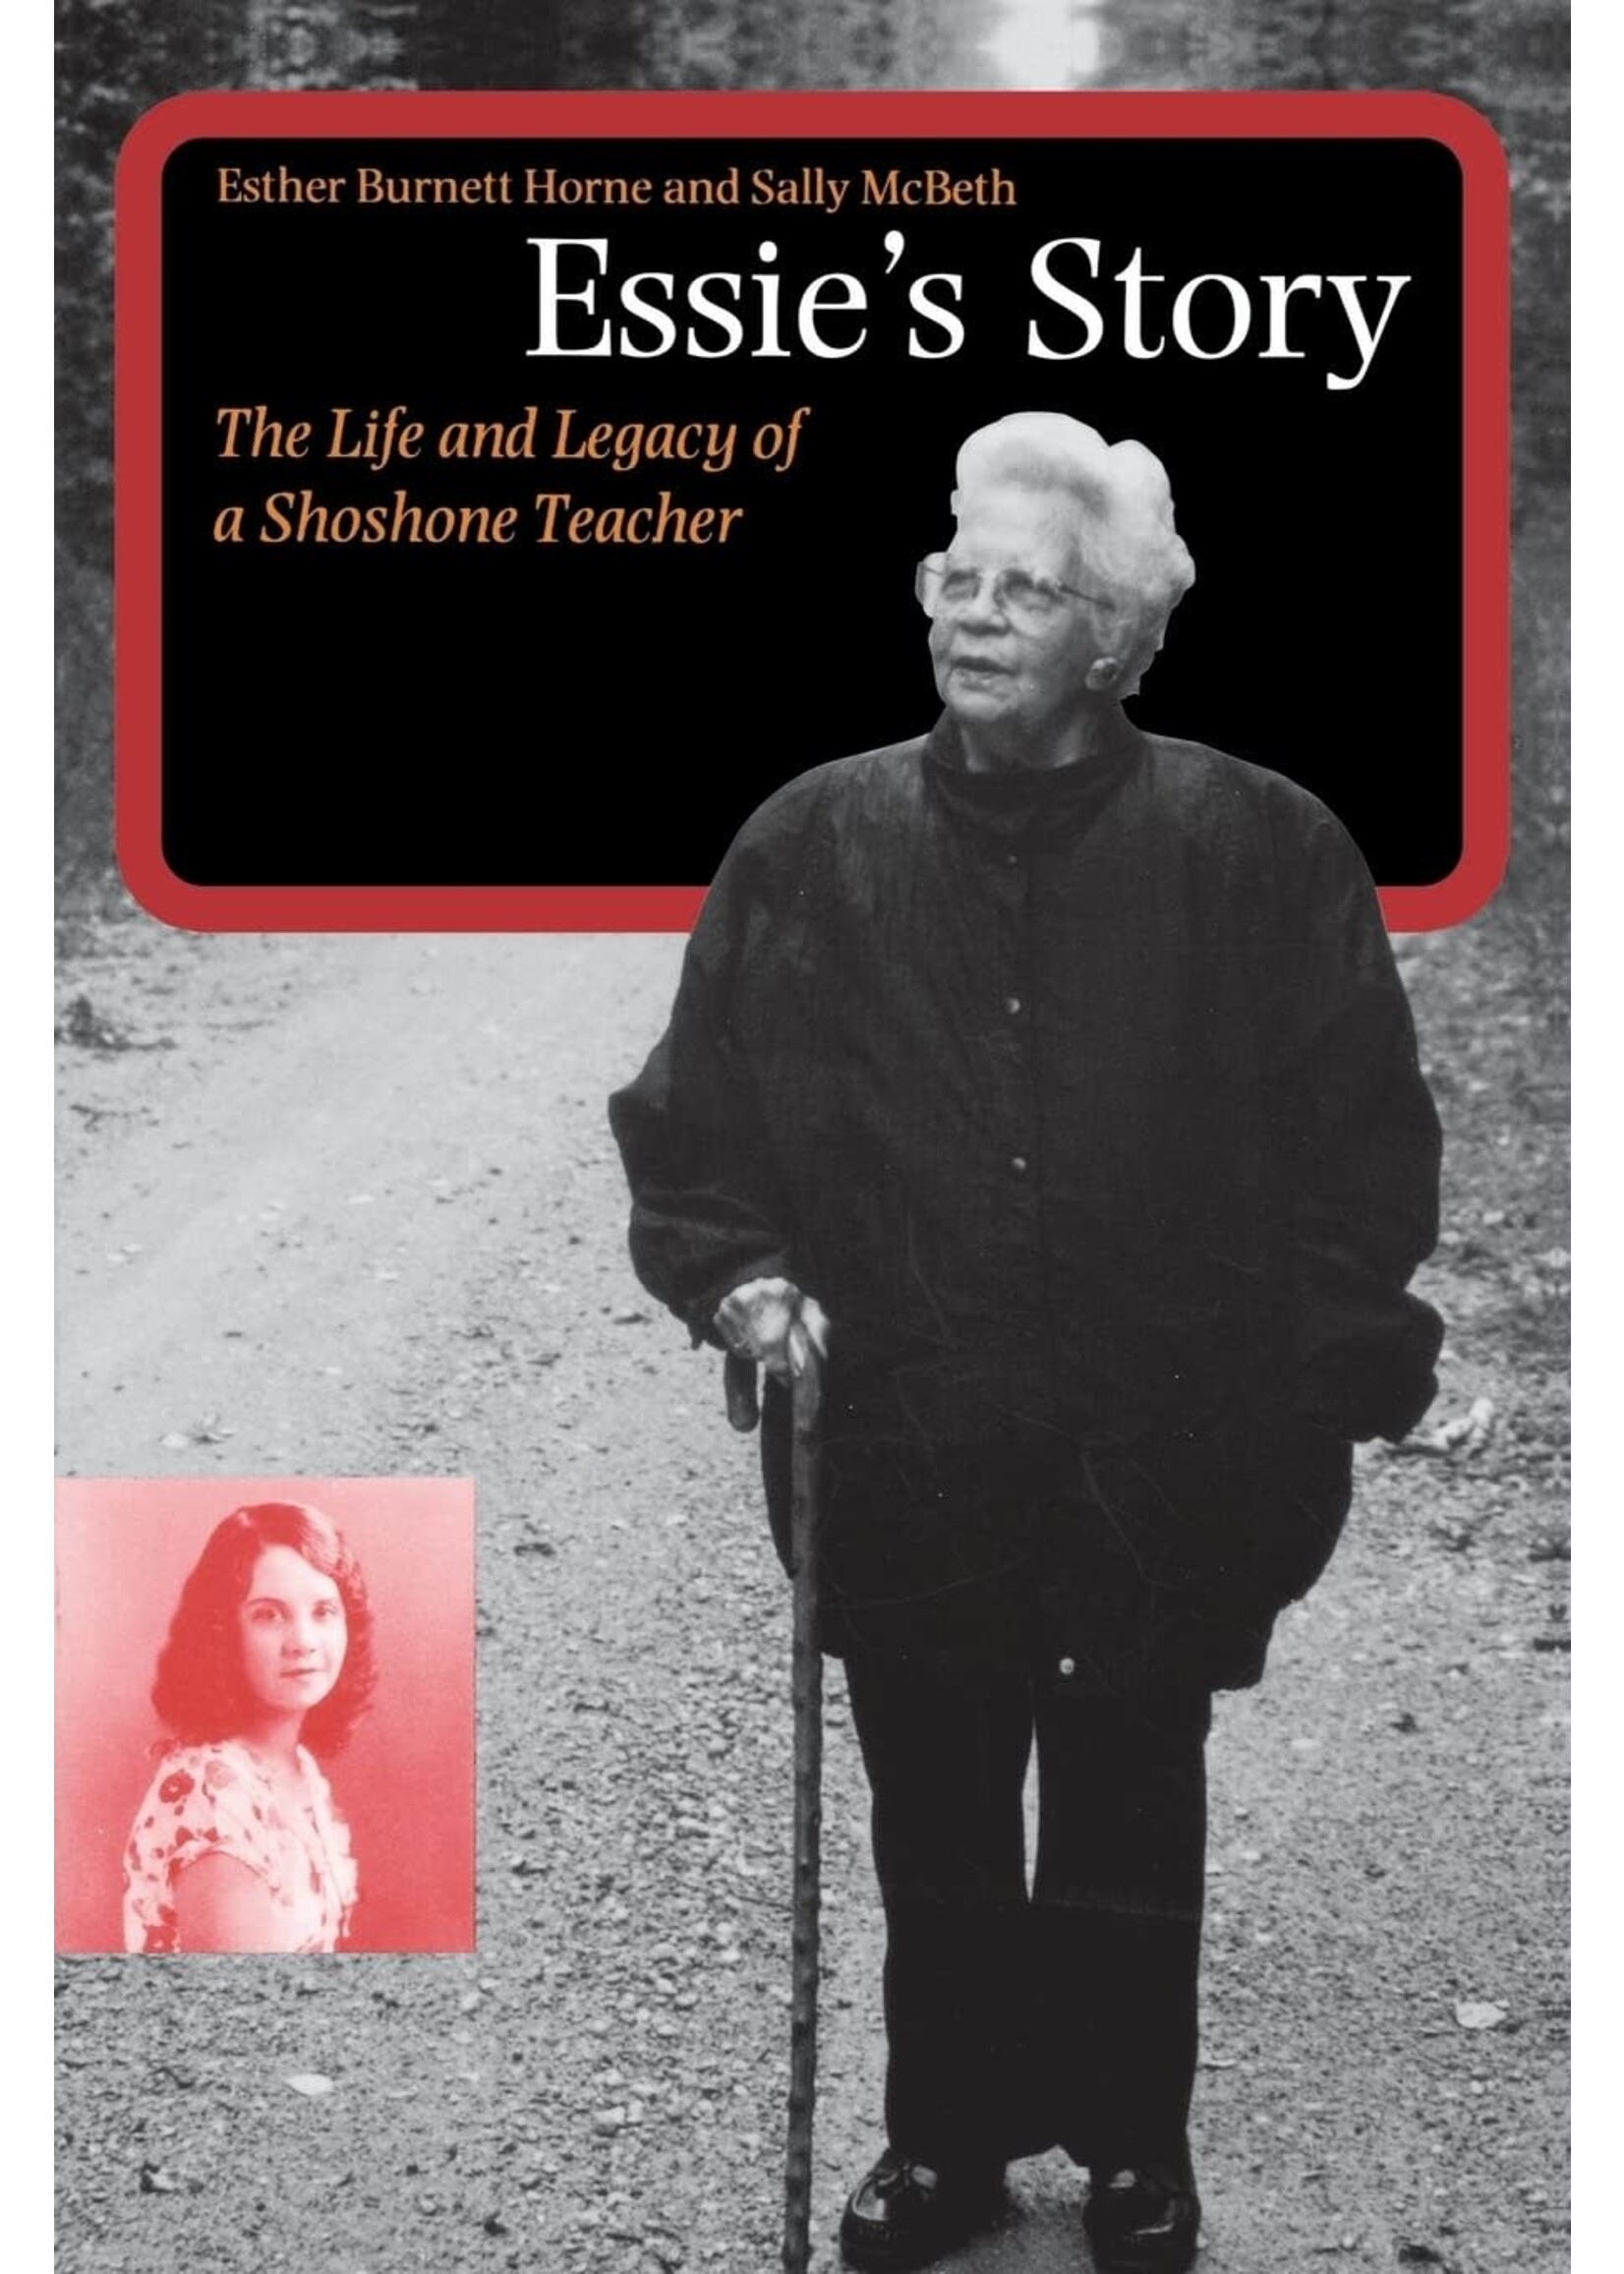 Essie's Story: The Life and Legacy of a Shoshone Teacher